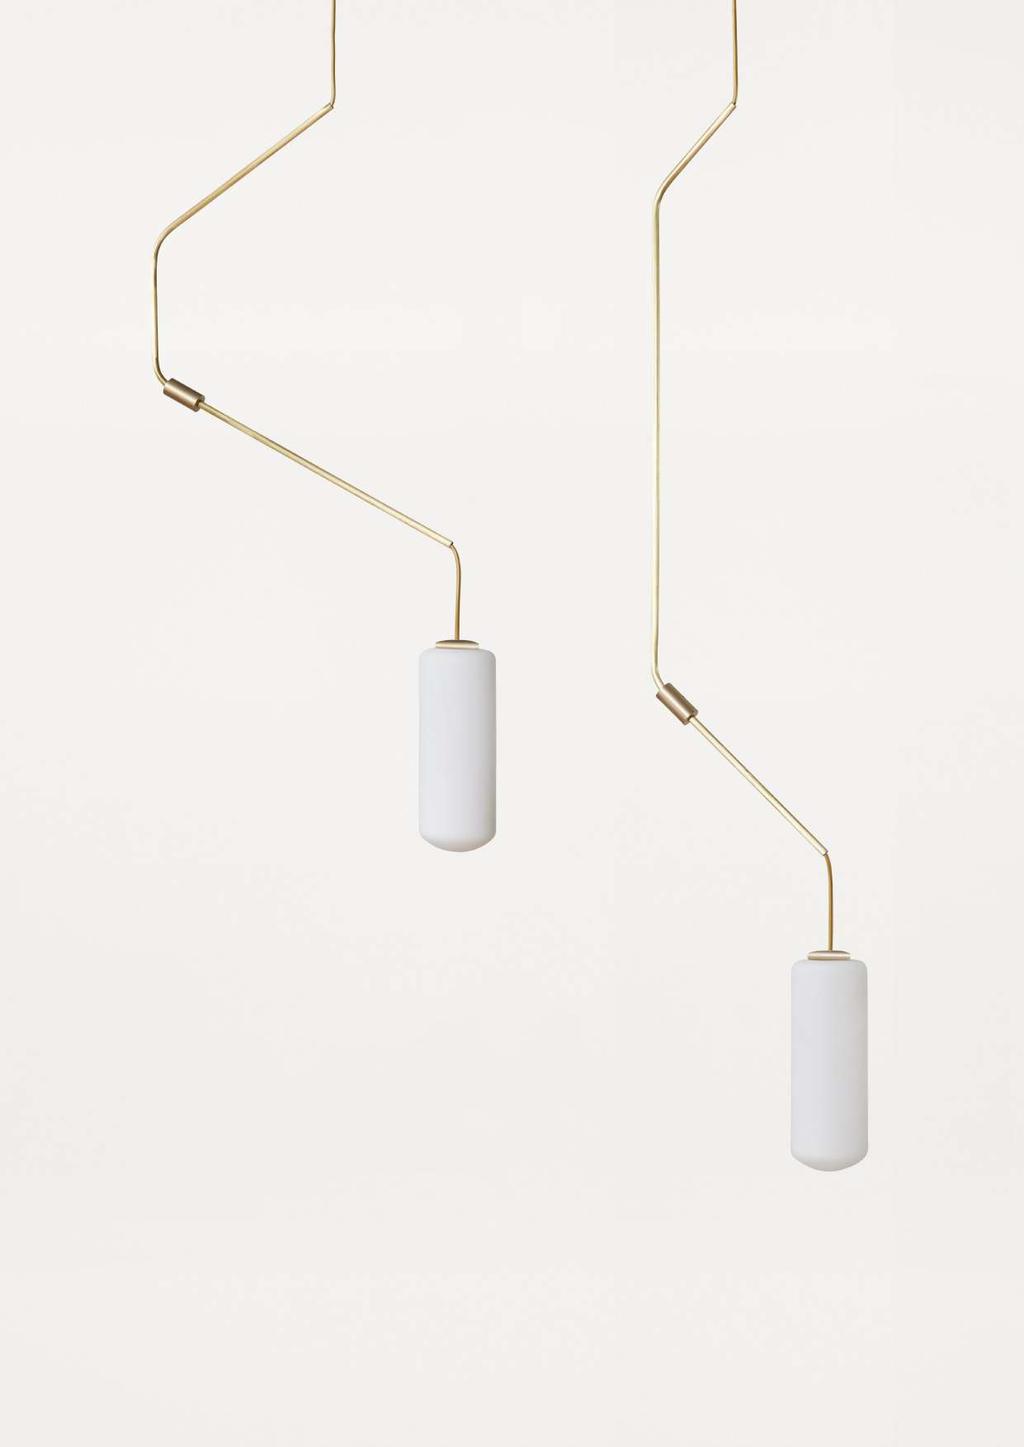 190 390 1320 870 264 264 form 1 ø90 form 2 ø90 VENTUS PENDANT Design Year 2014 Typology Collection Origin Material Cord Certifications Cord Installation Socket Included Middle Pendant Lamp Permanent